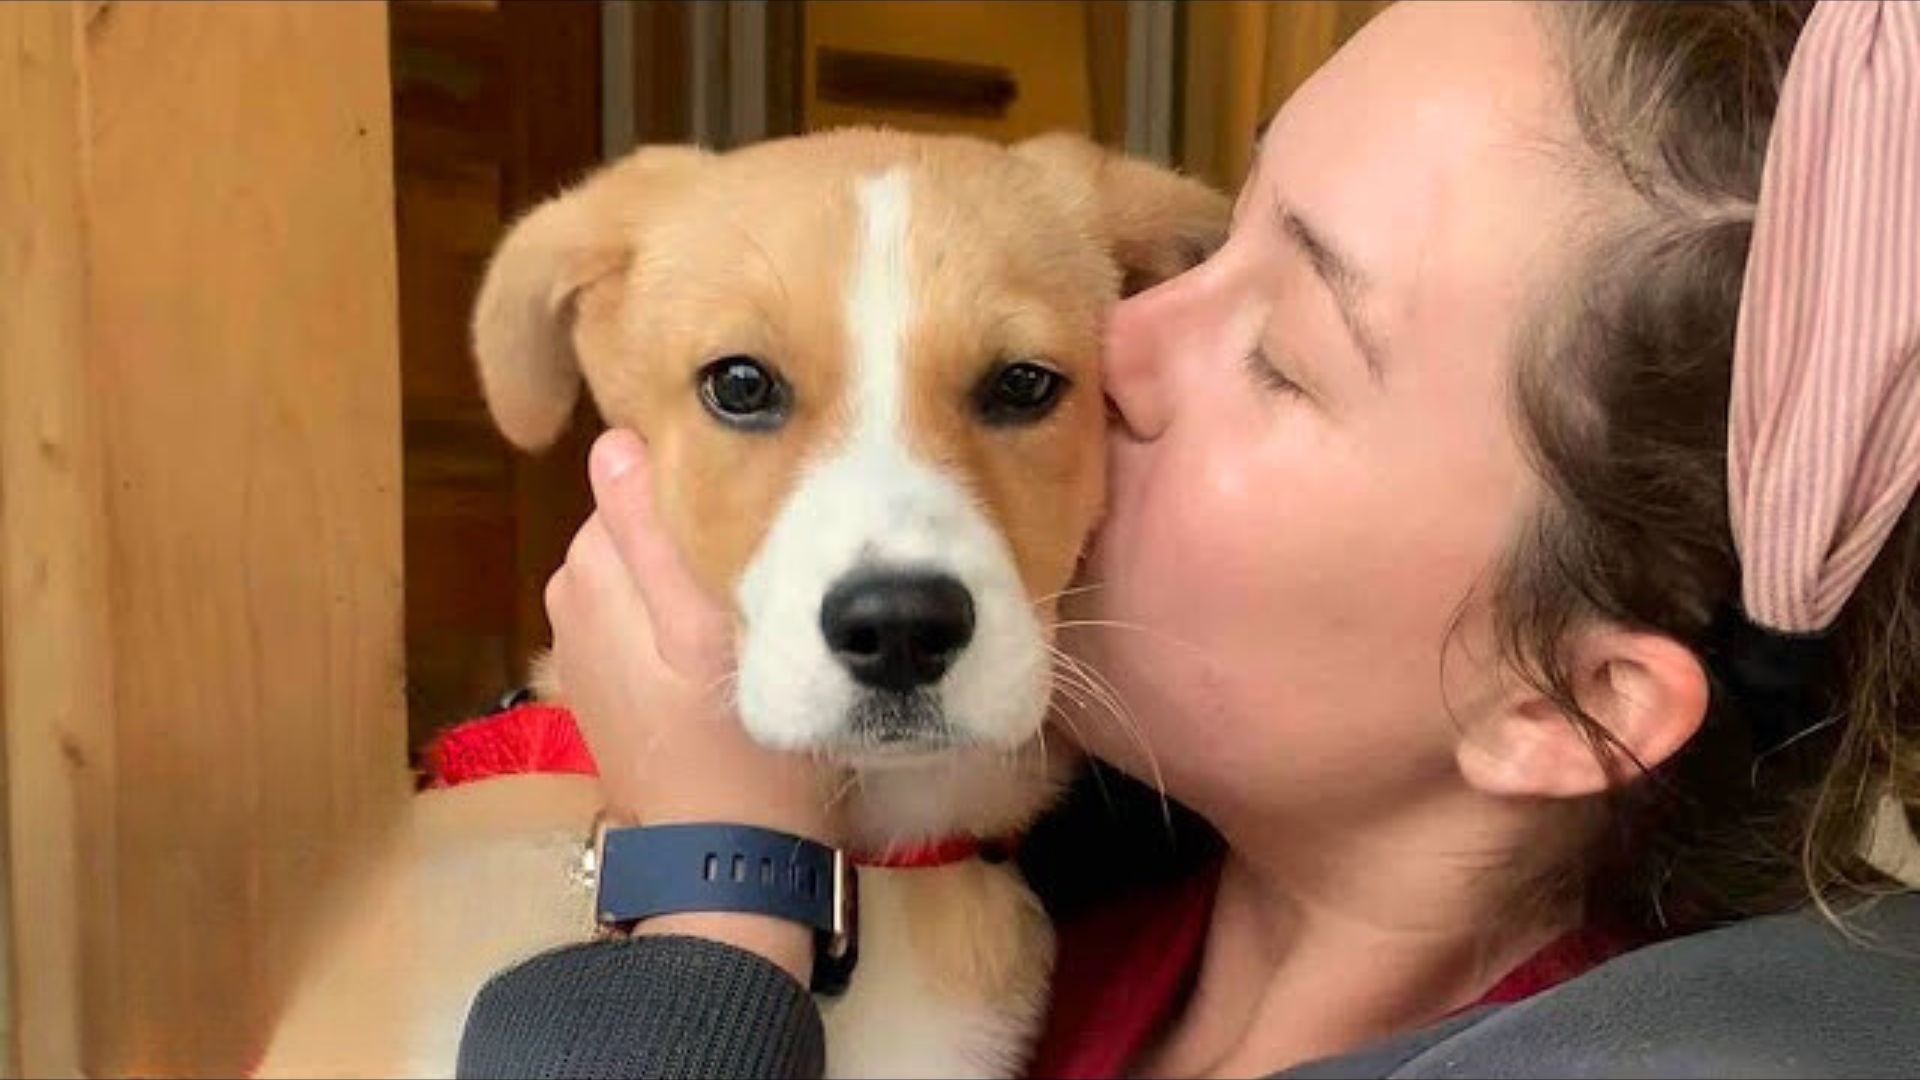 Terrified Puppy Who Kept Crying At A Shelter Finds Her Happily-Ever-After